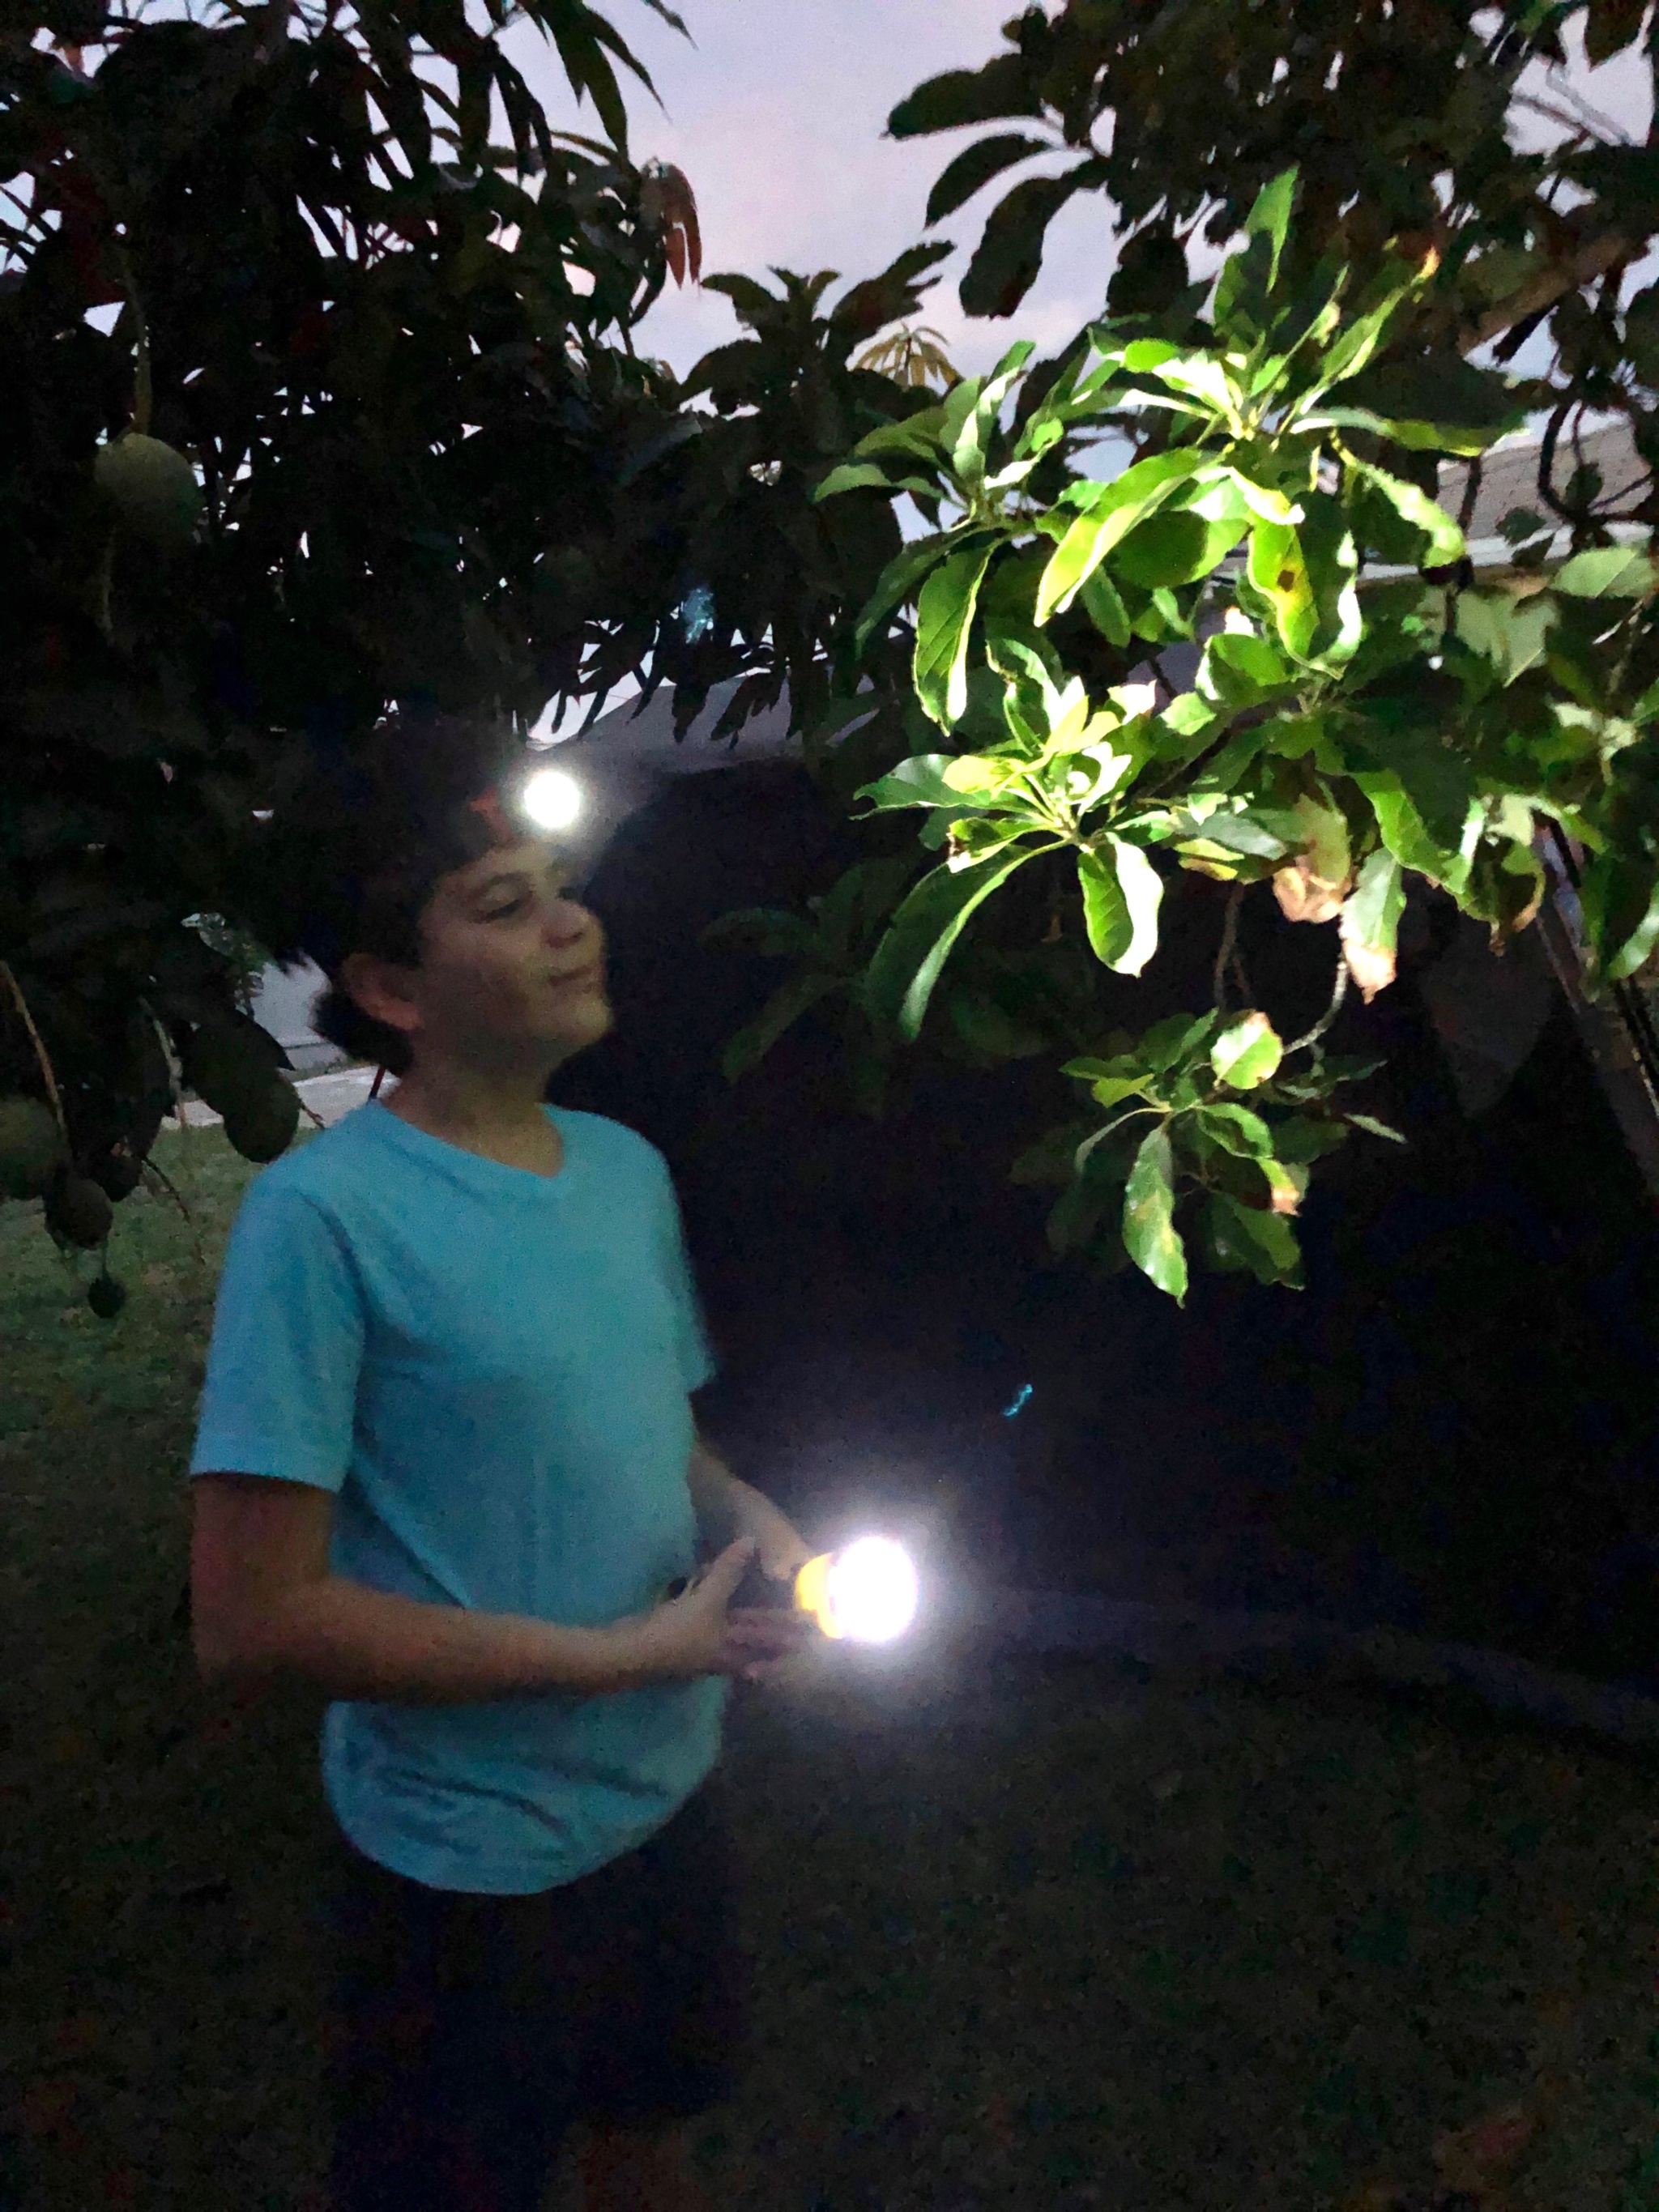 Fun Flashlight Games To Do While Camping or Anytime